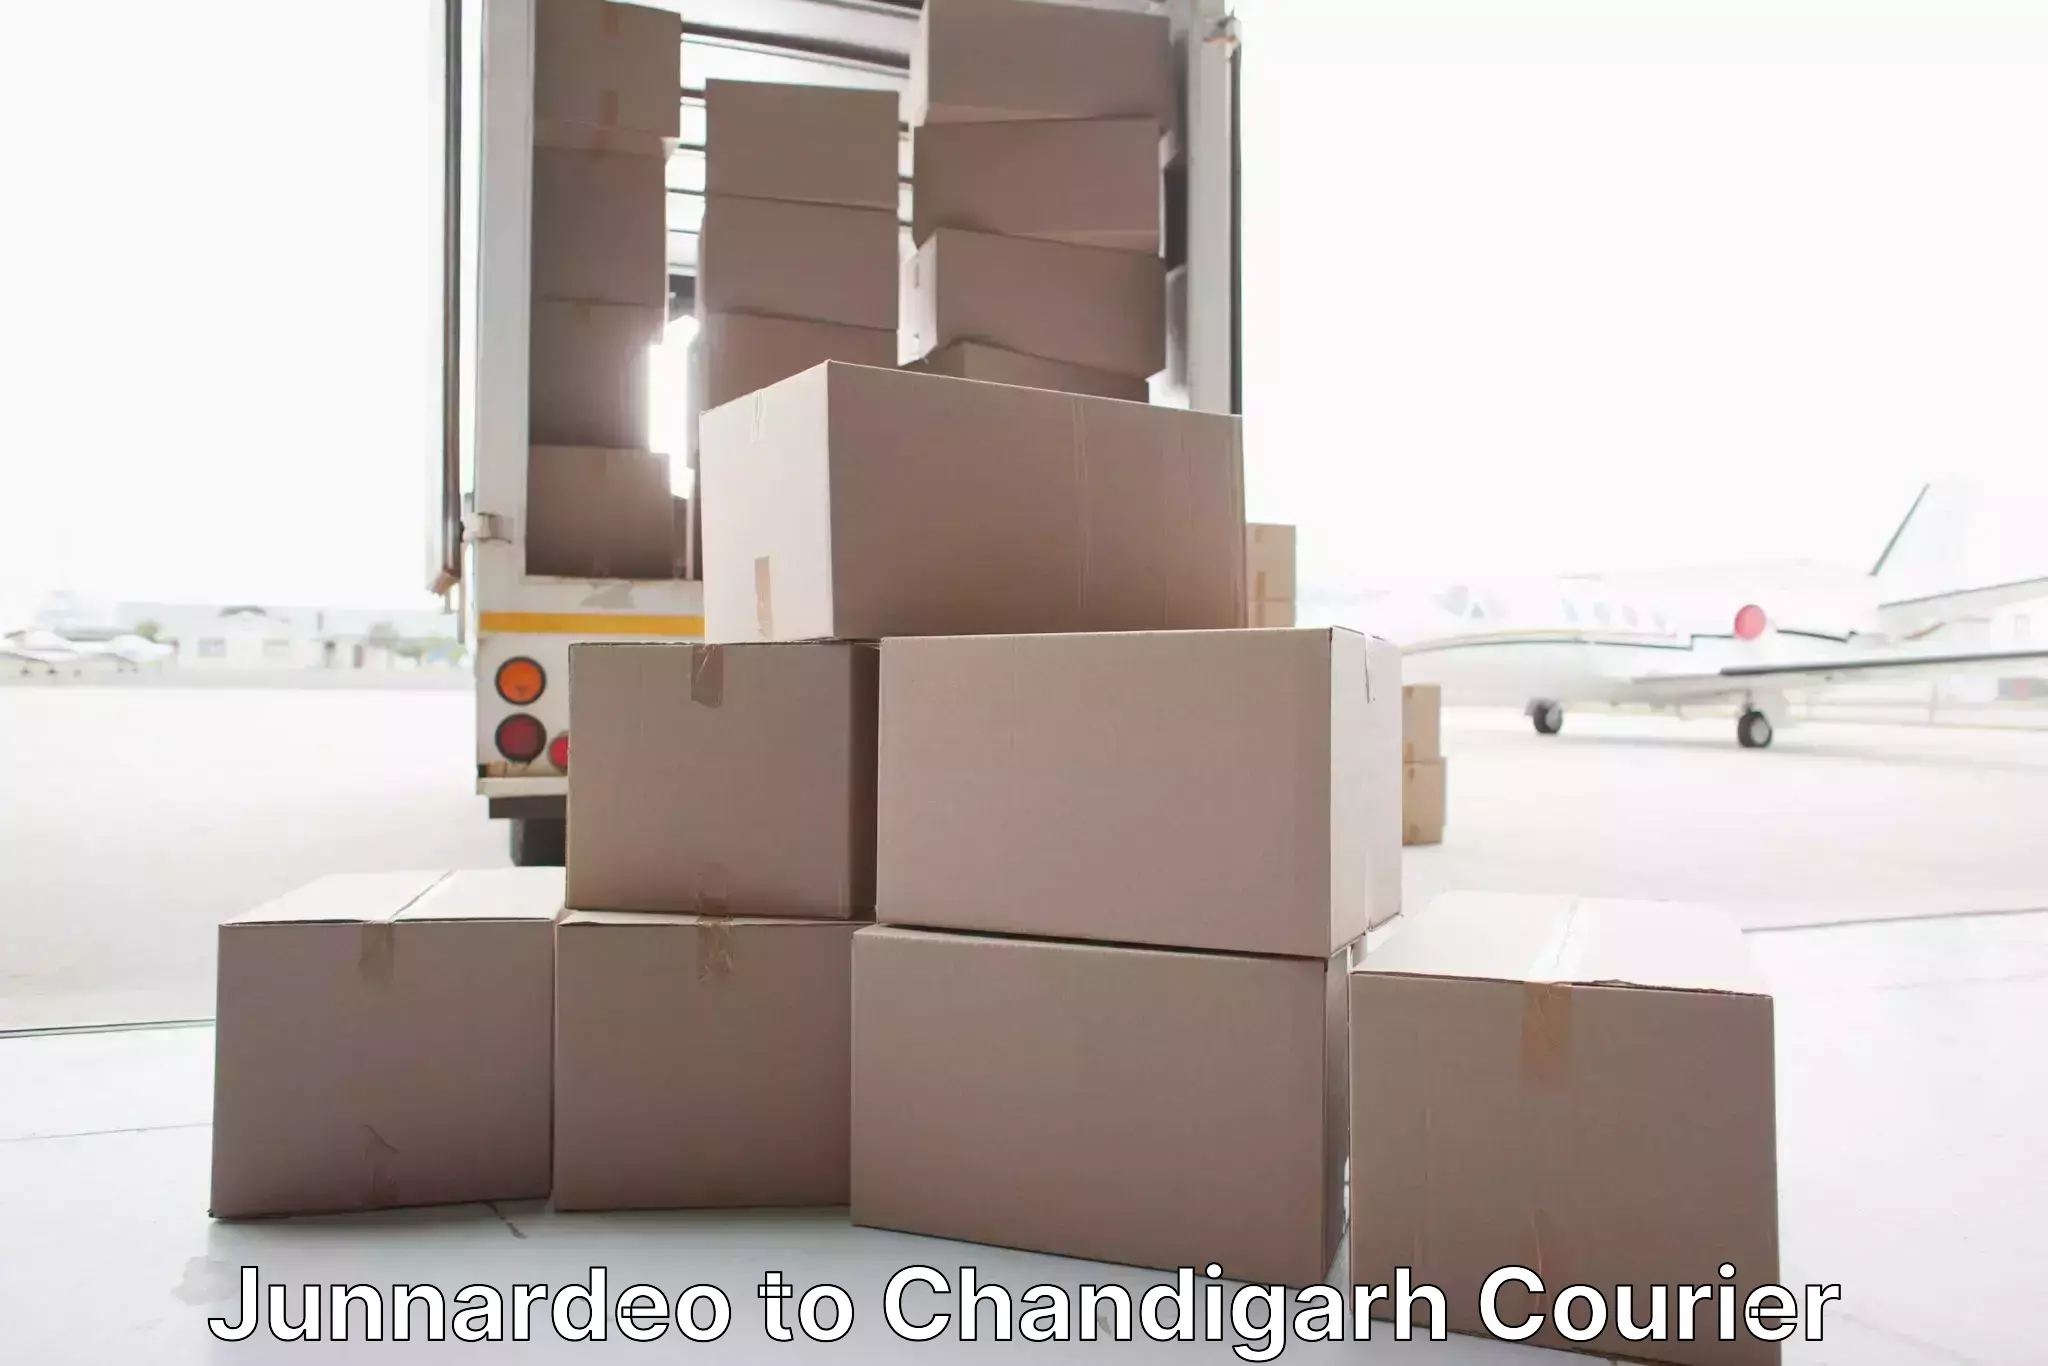 Long-distance moving services Junnardeo to Panjab University Chandigarh